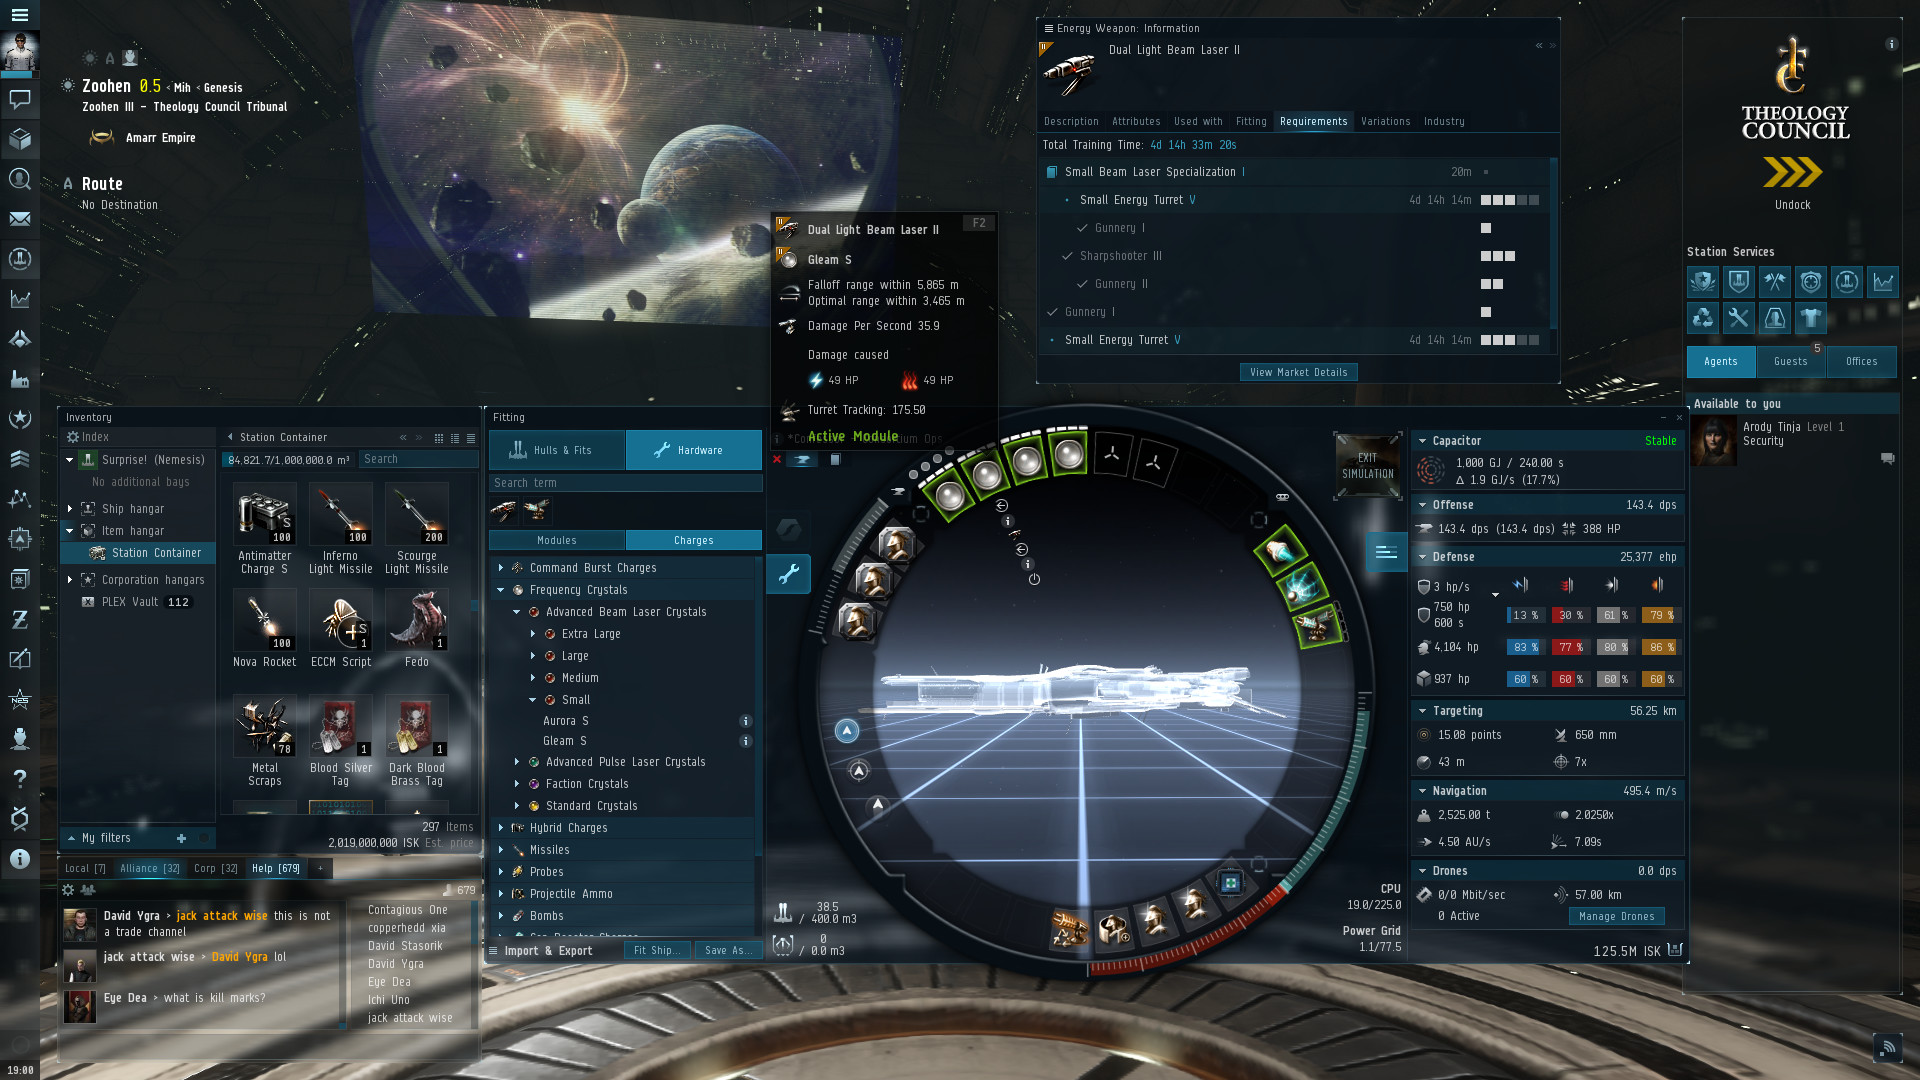 eveonline download